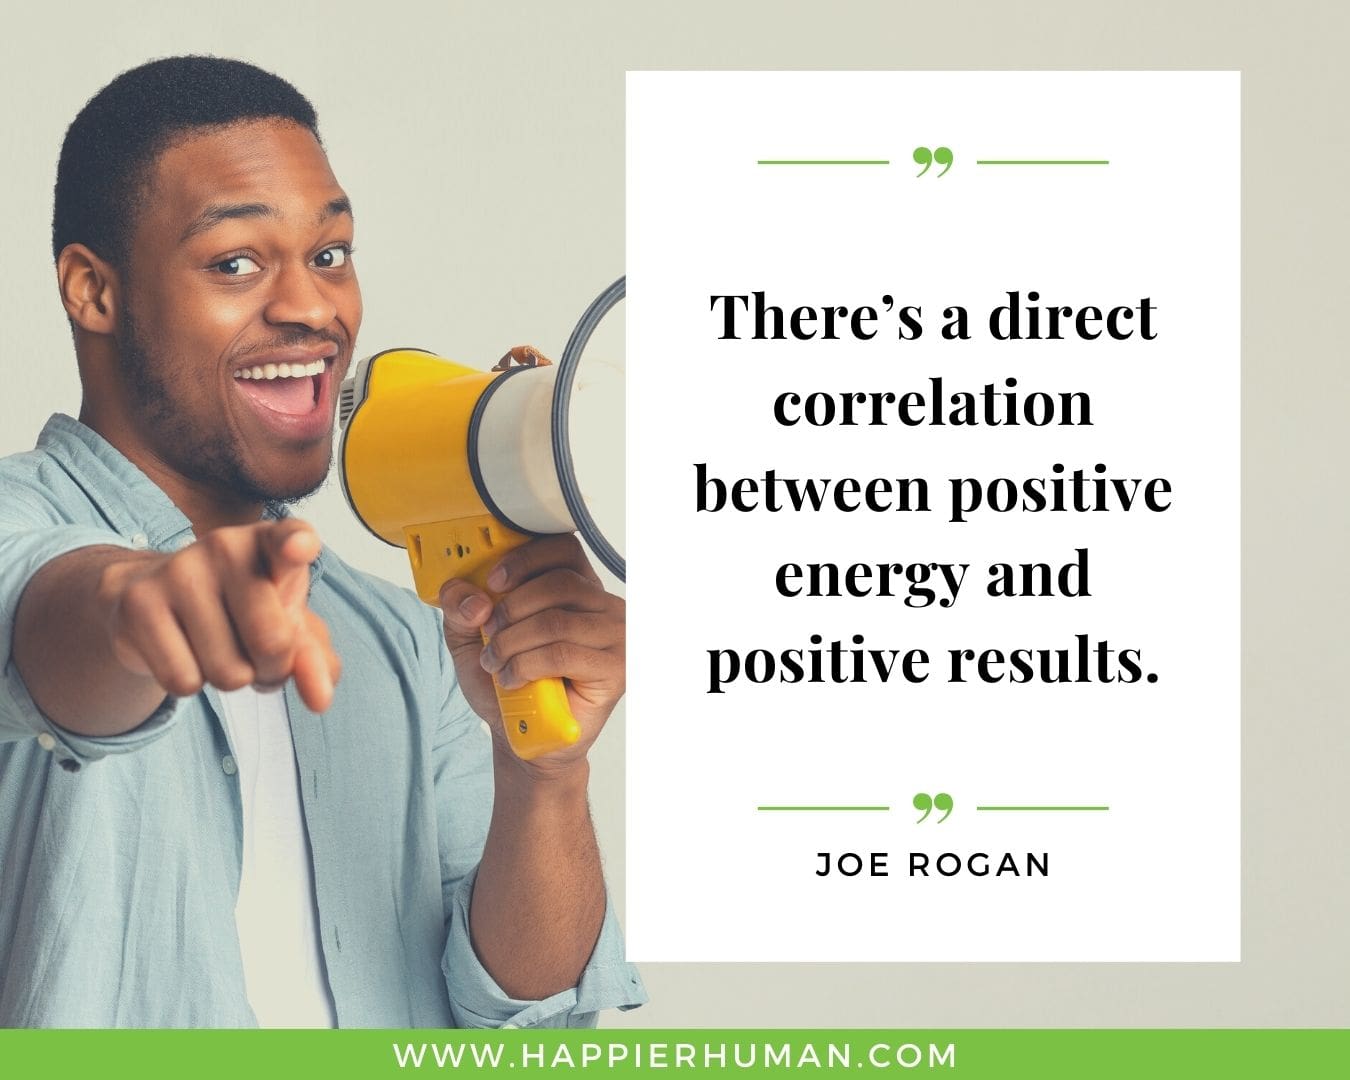 Positive Energy Quotes - “There’s a direct correlation between positive energy and positive results.” - Joe Rogan